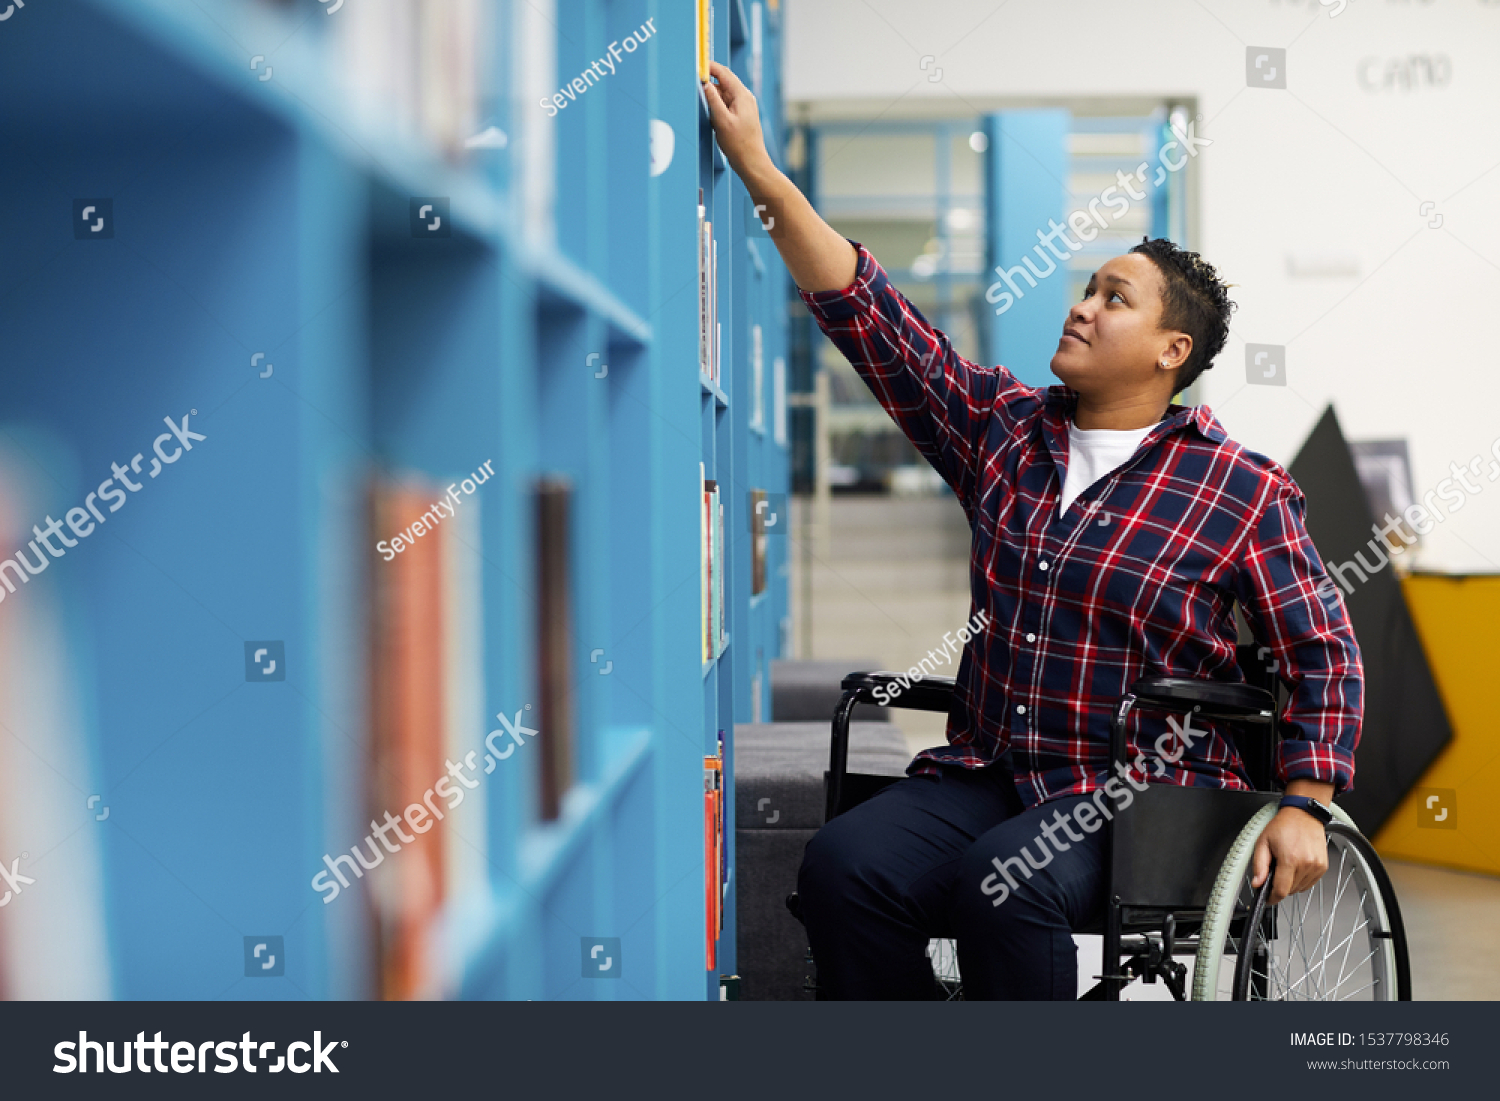 Portrait of disabled student in wheelchair choosing books while studying in college library, copy space #1537798346